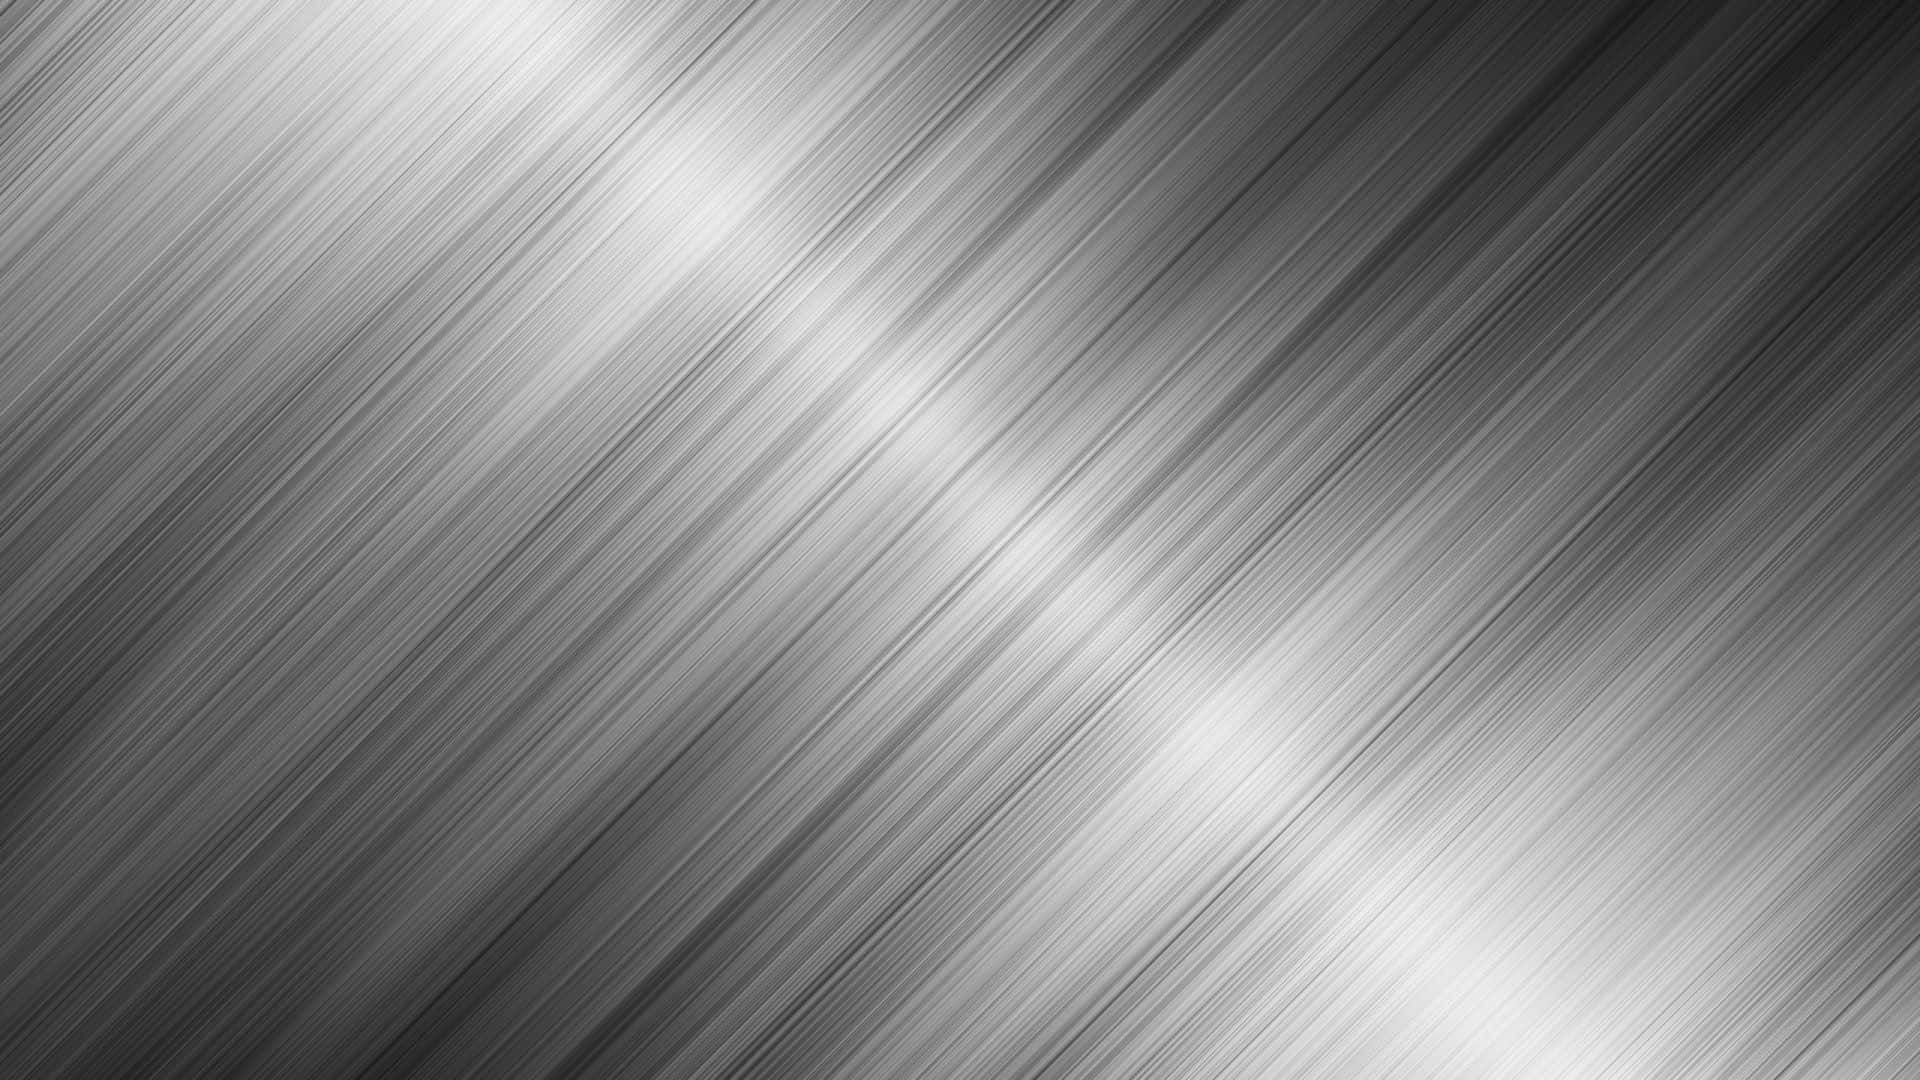 A Black And White Metal Background With Lines